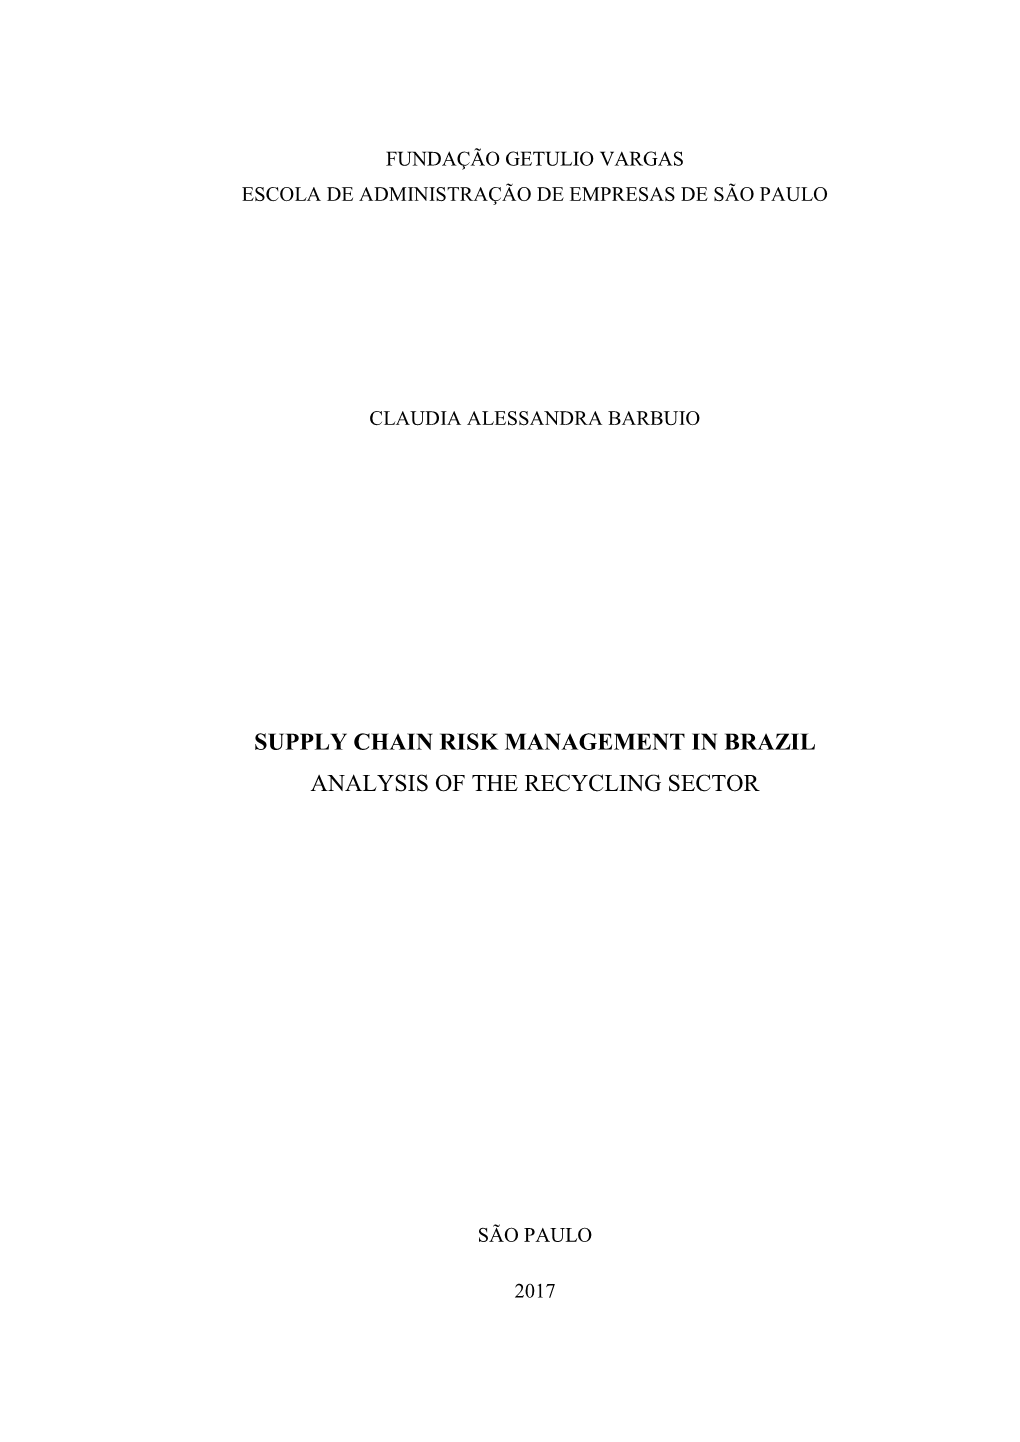 Supply Chain Risk Management in Brazil Analysis of the Recycling Sector